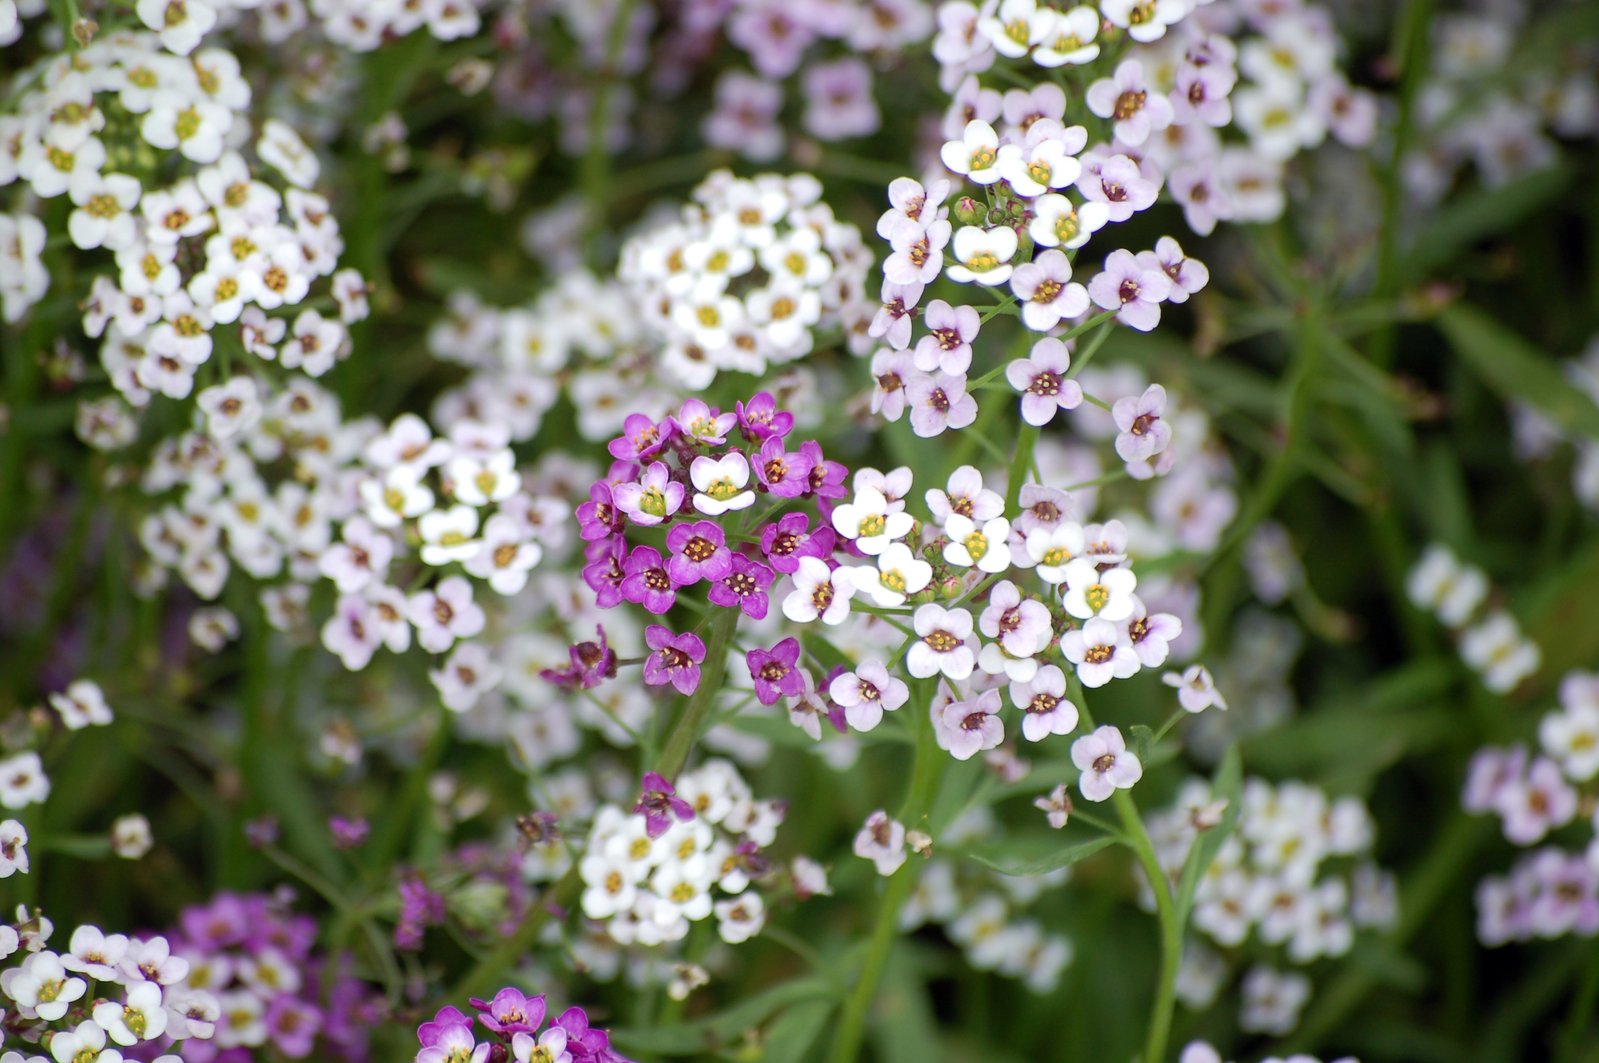 close up of a flower field with many small white and purple flowers